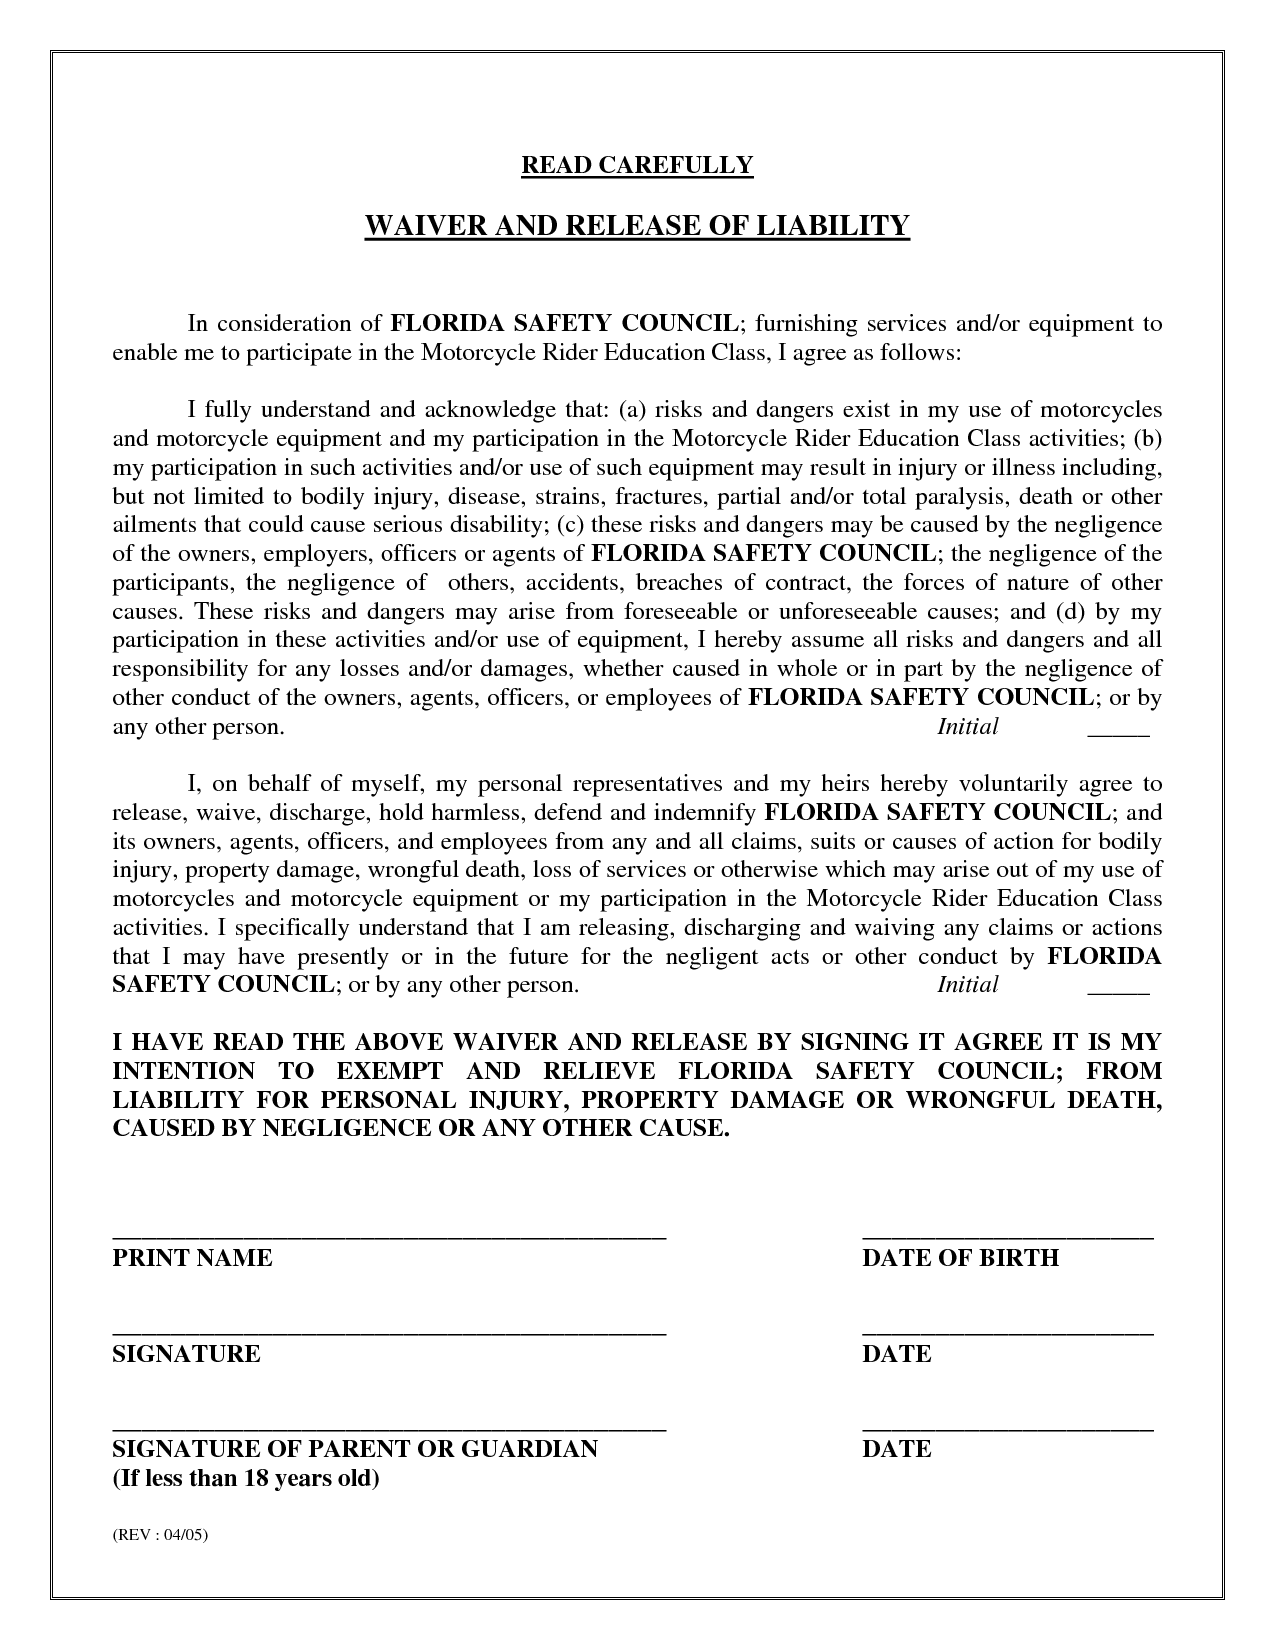 Liability Waiver Example Free Printable Documents 9141